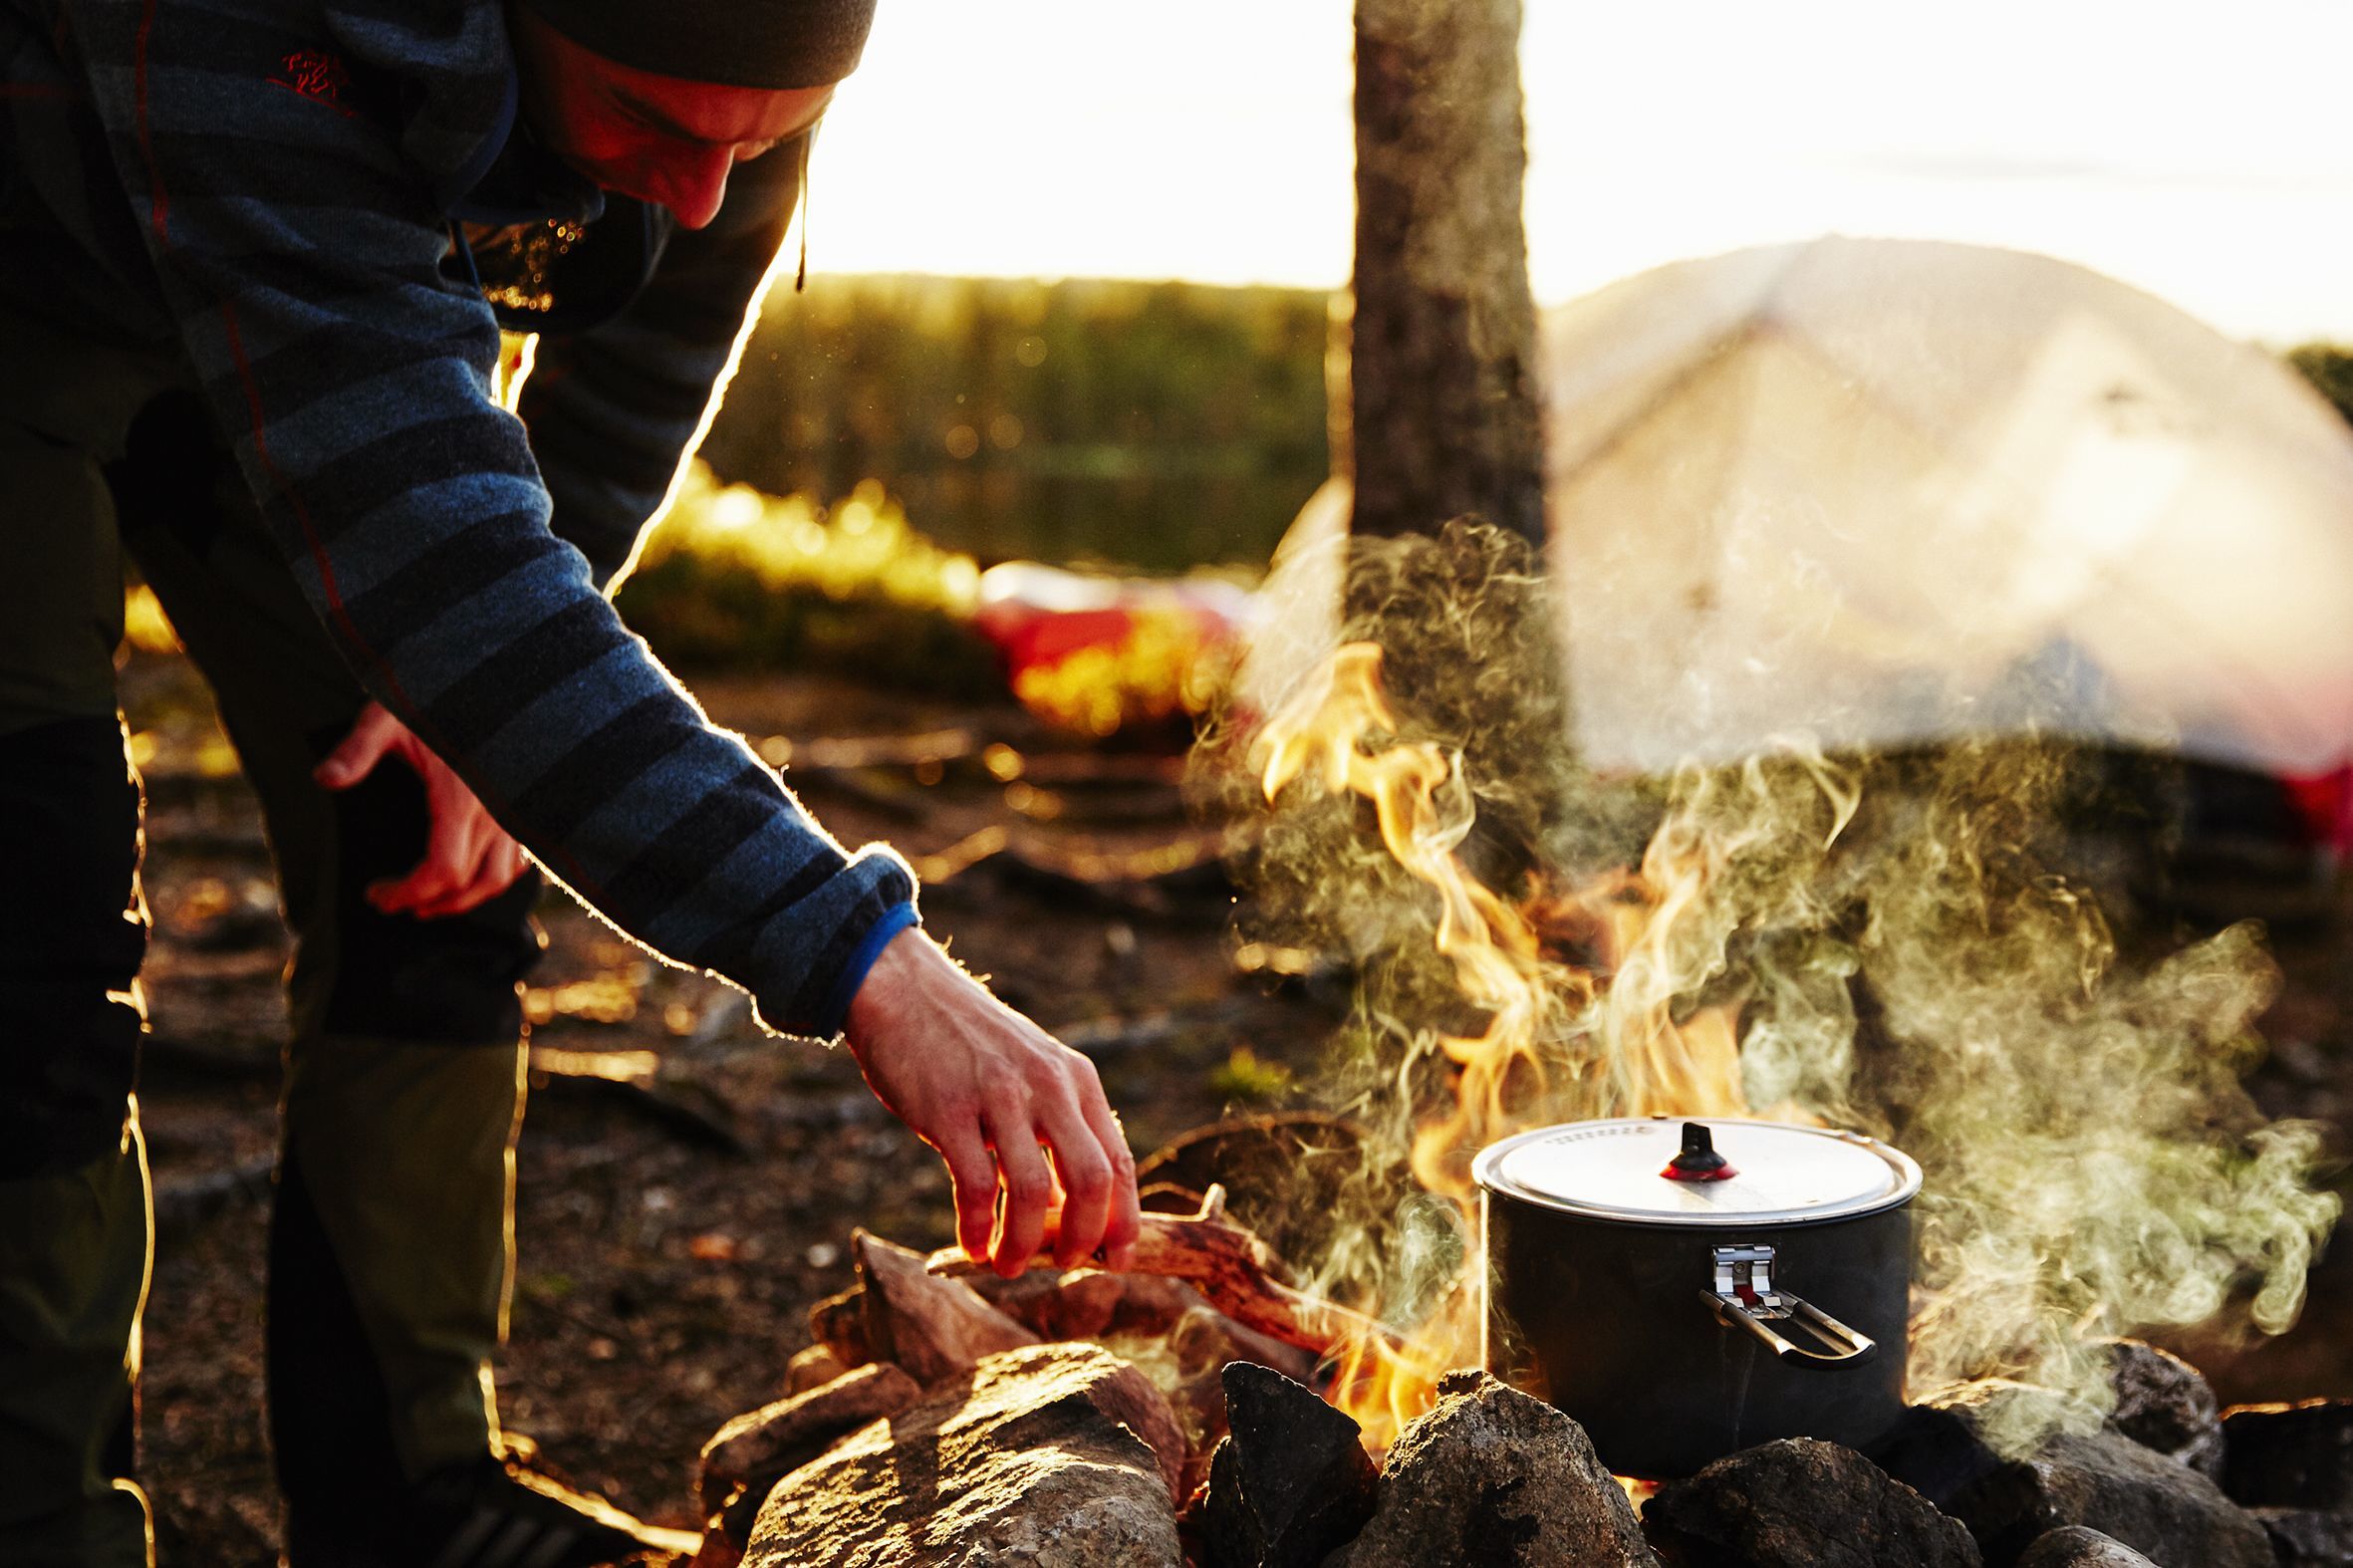 Young man stoking the fire at a campite of our expedition in norway, while cooking food over the fire.